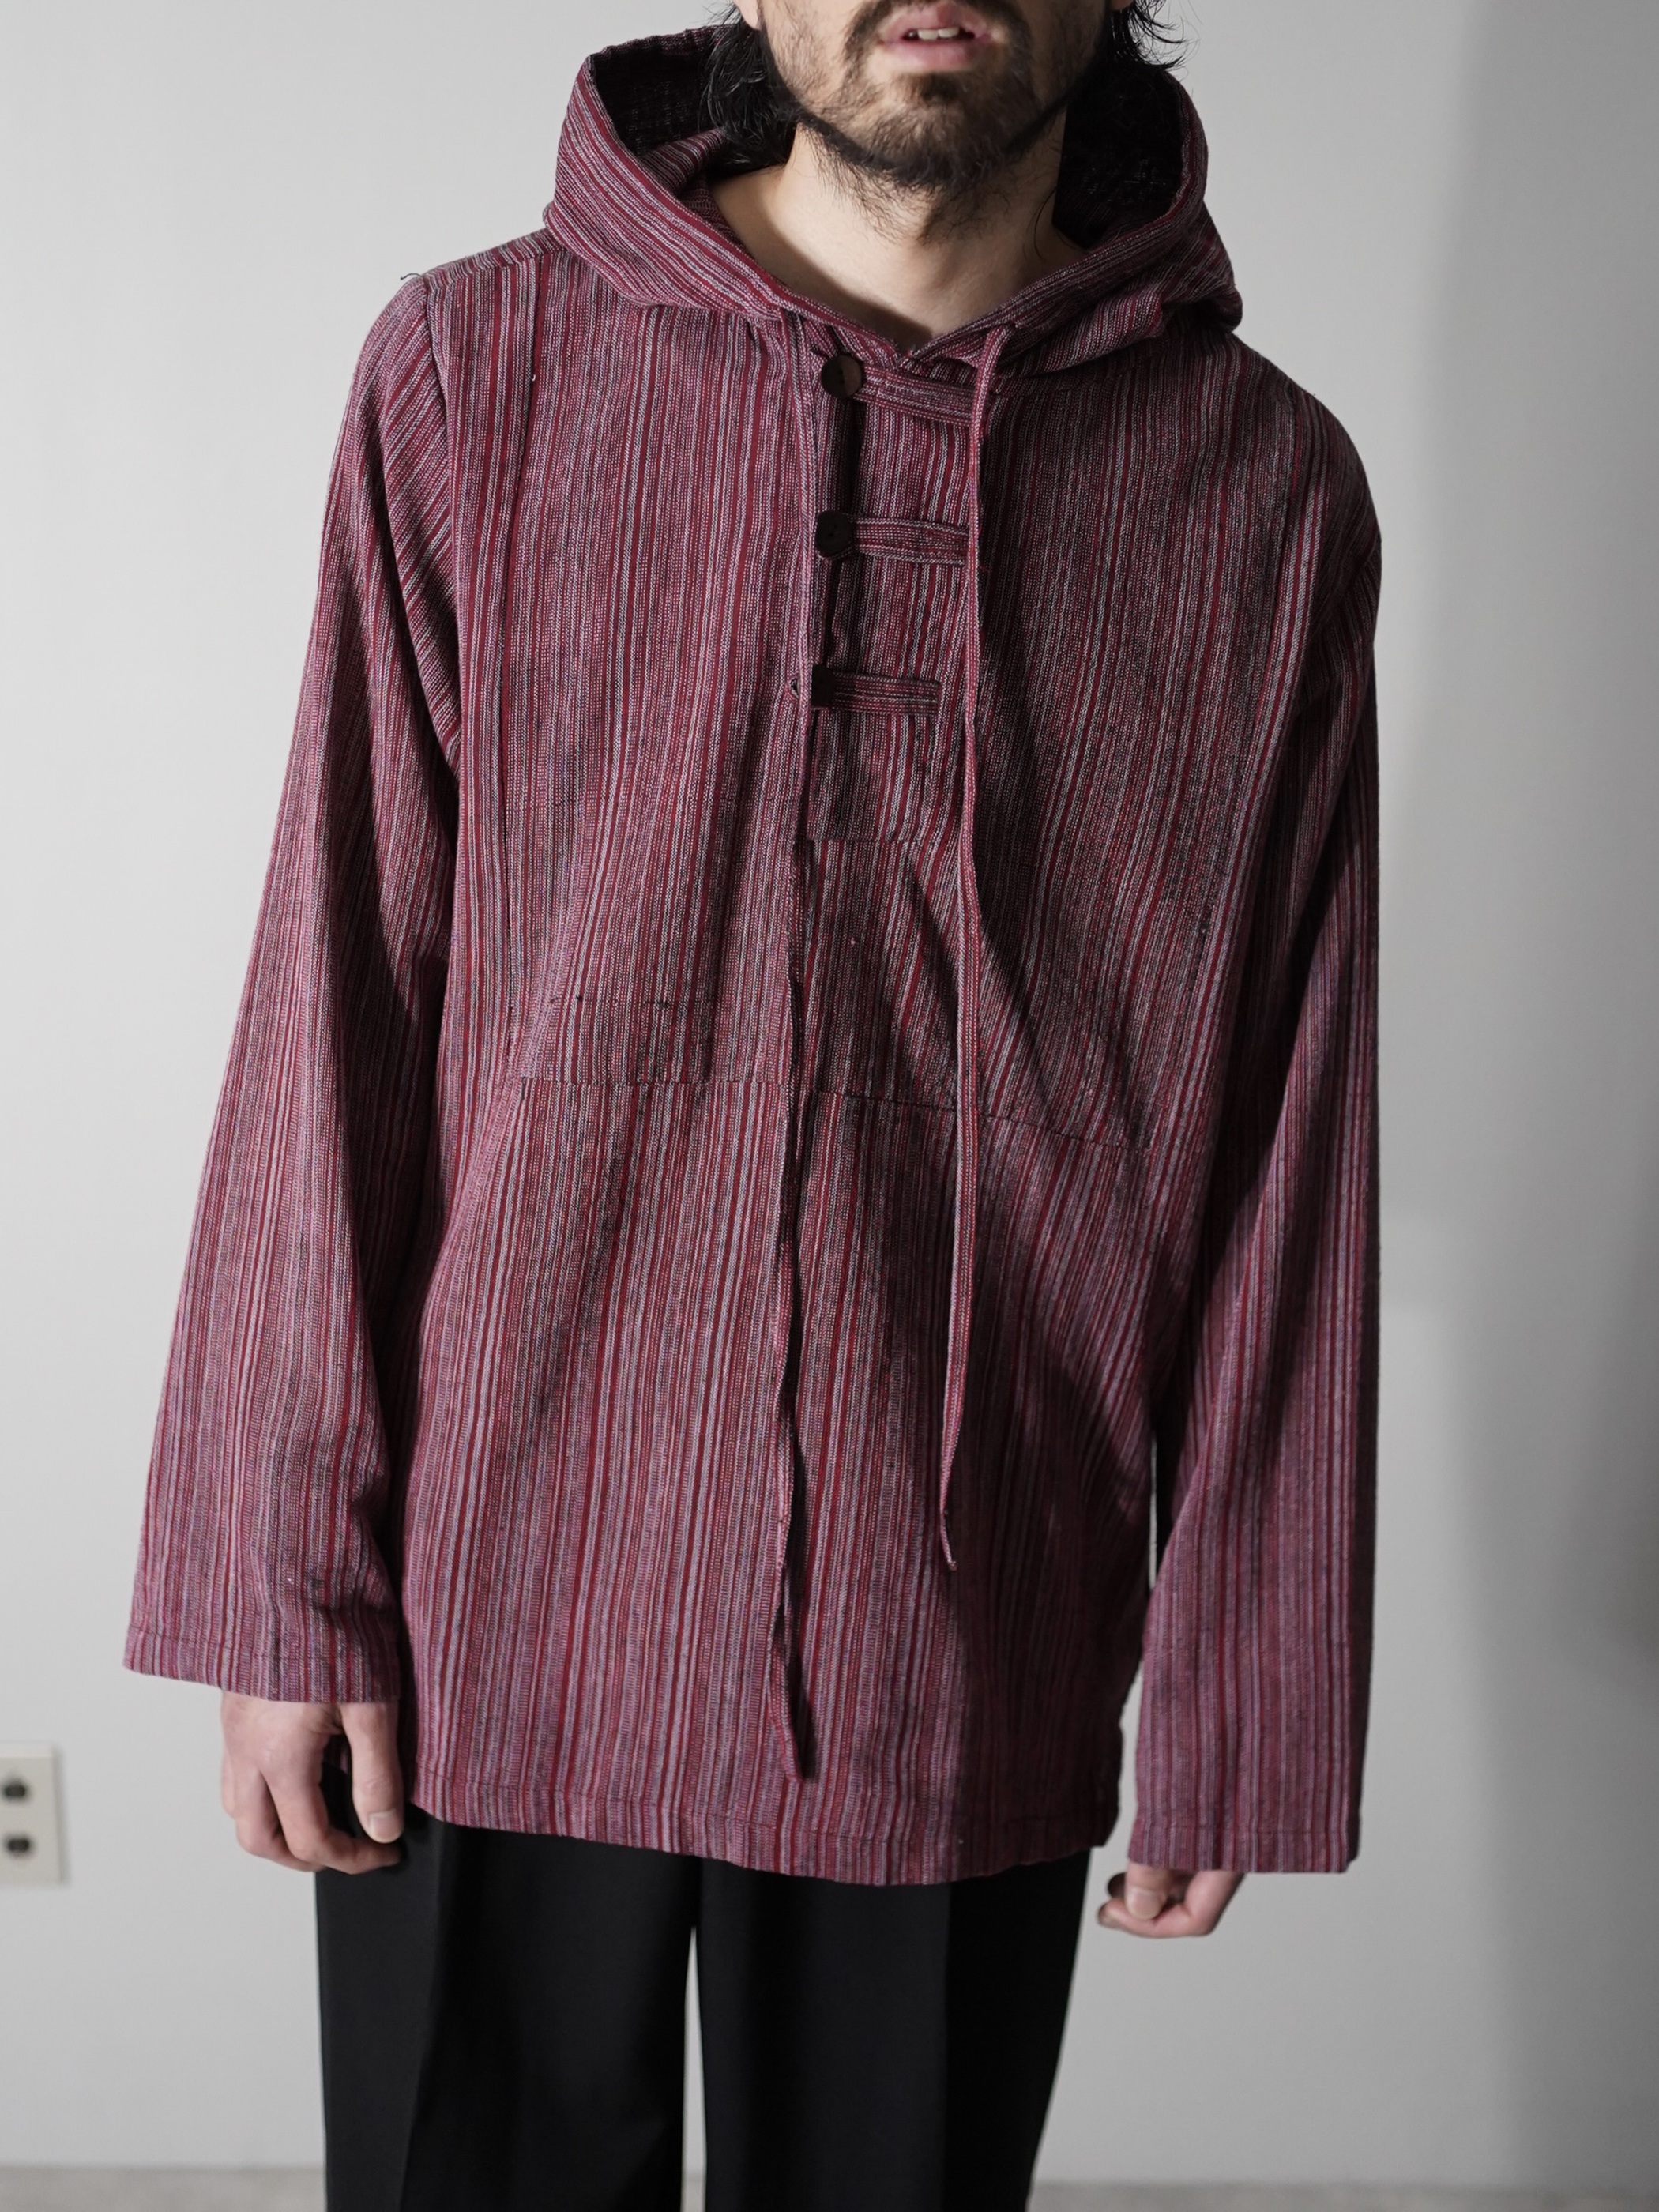 EARTHBOUND shirt fabric cotton hoodie / Made in India